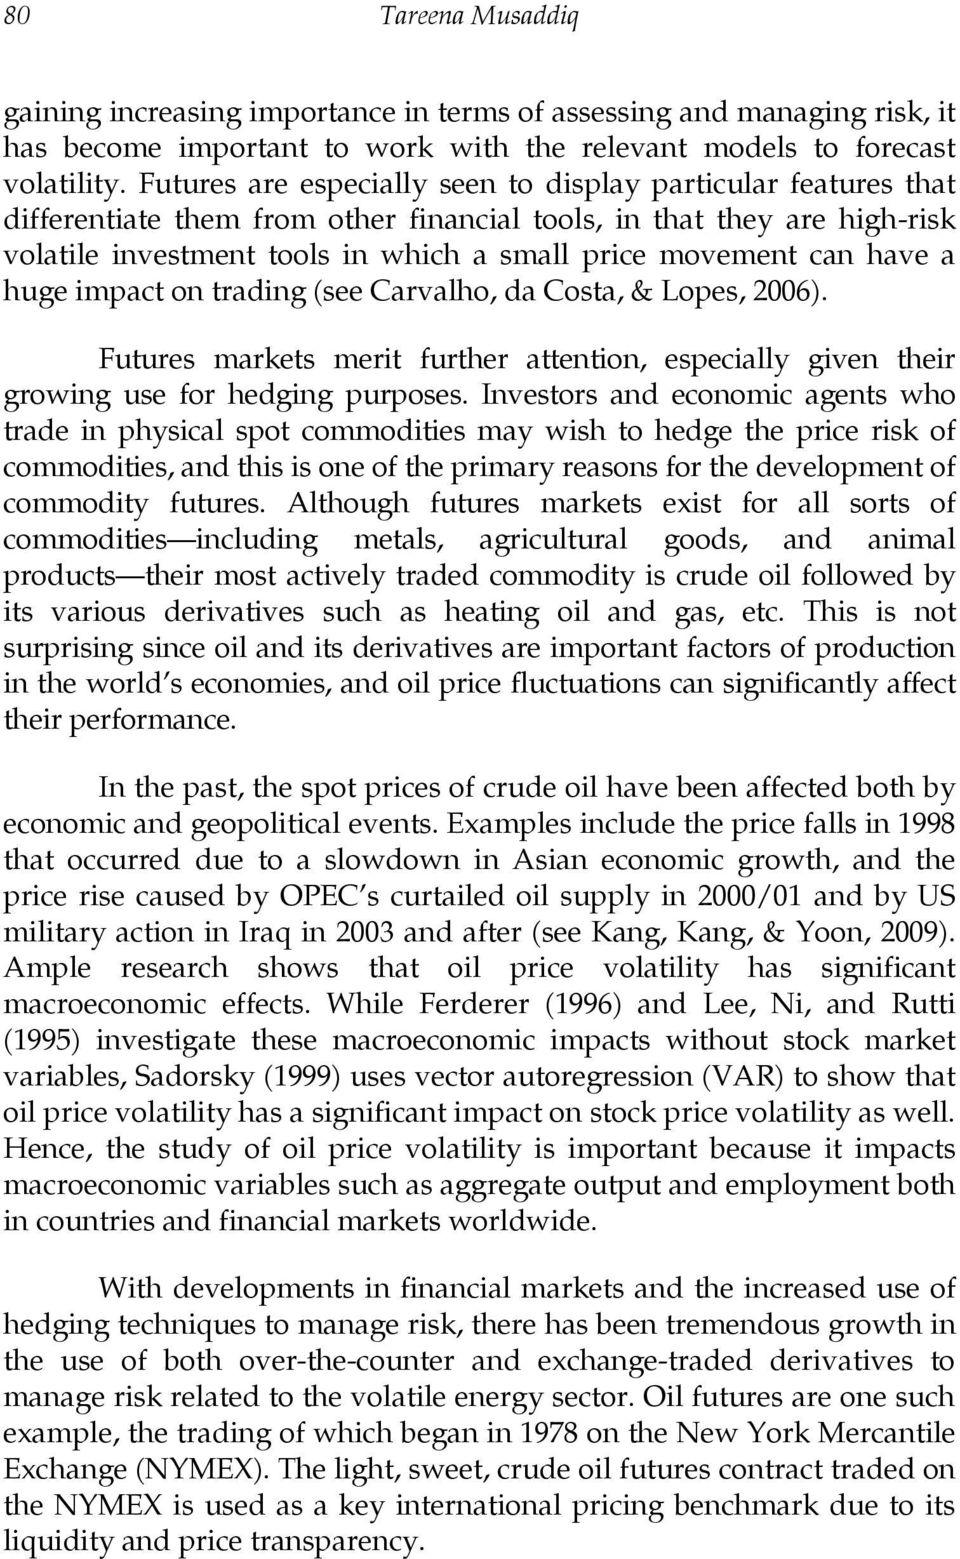 have a huge impact on trading (see Carvalho, da Costa, & Lopes, 2006). Futures markets merit further attention, especially given their growing use for hedging purposes.